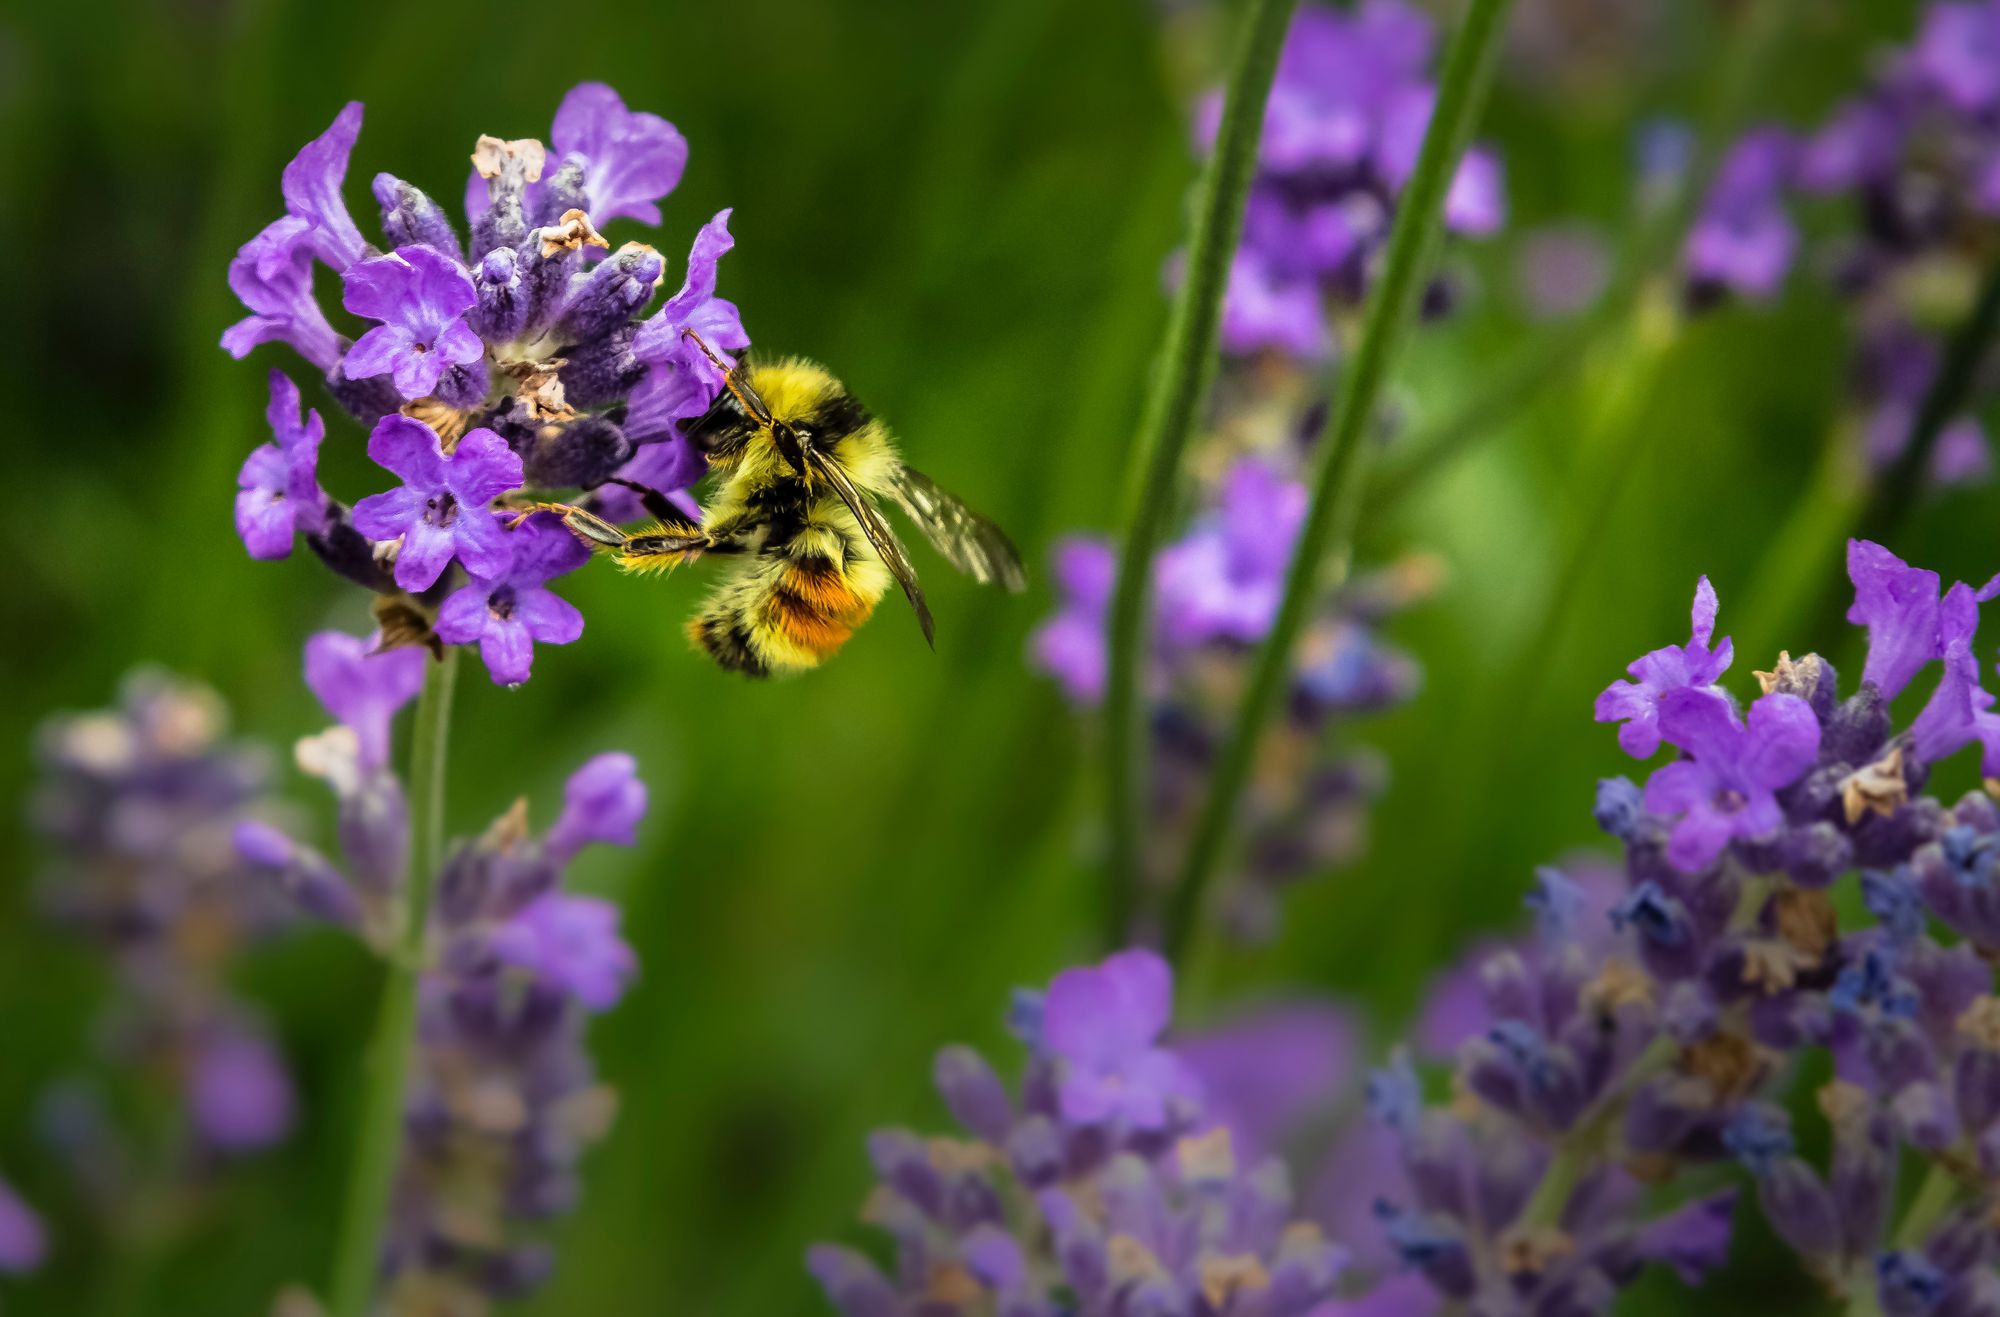 Quick Fact: One third of the food that we consume each day relies on pollination mainly by bees.